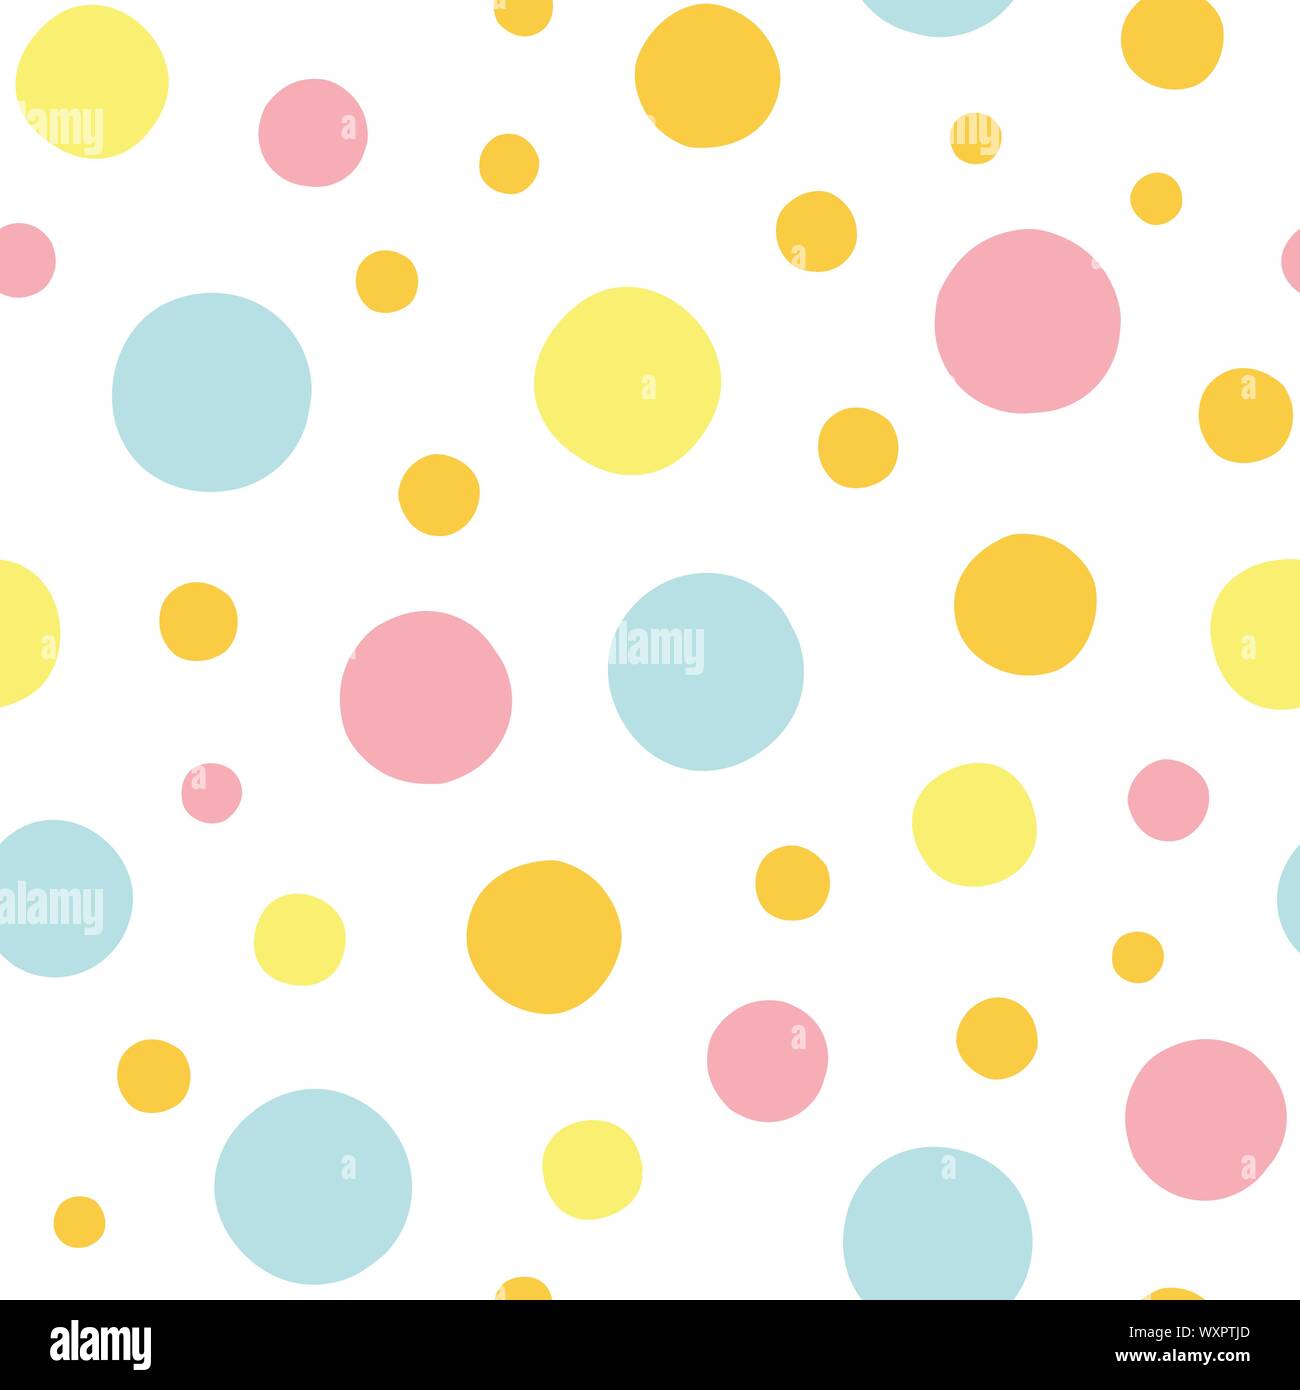 White vector repeat pattern with blue, yellow and pink polka dots ...